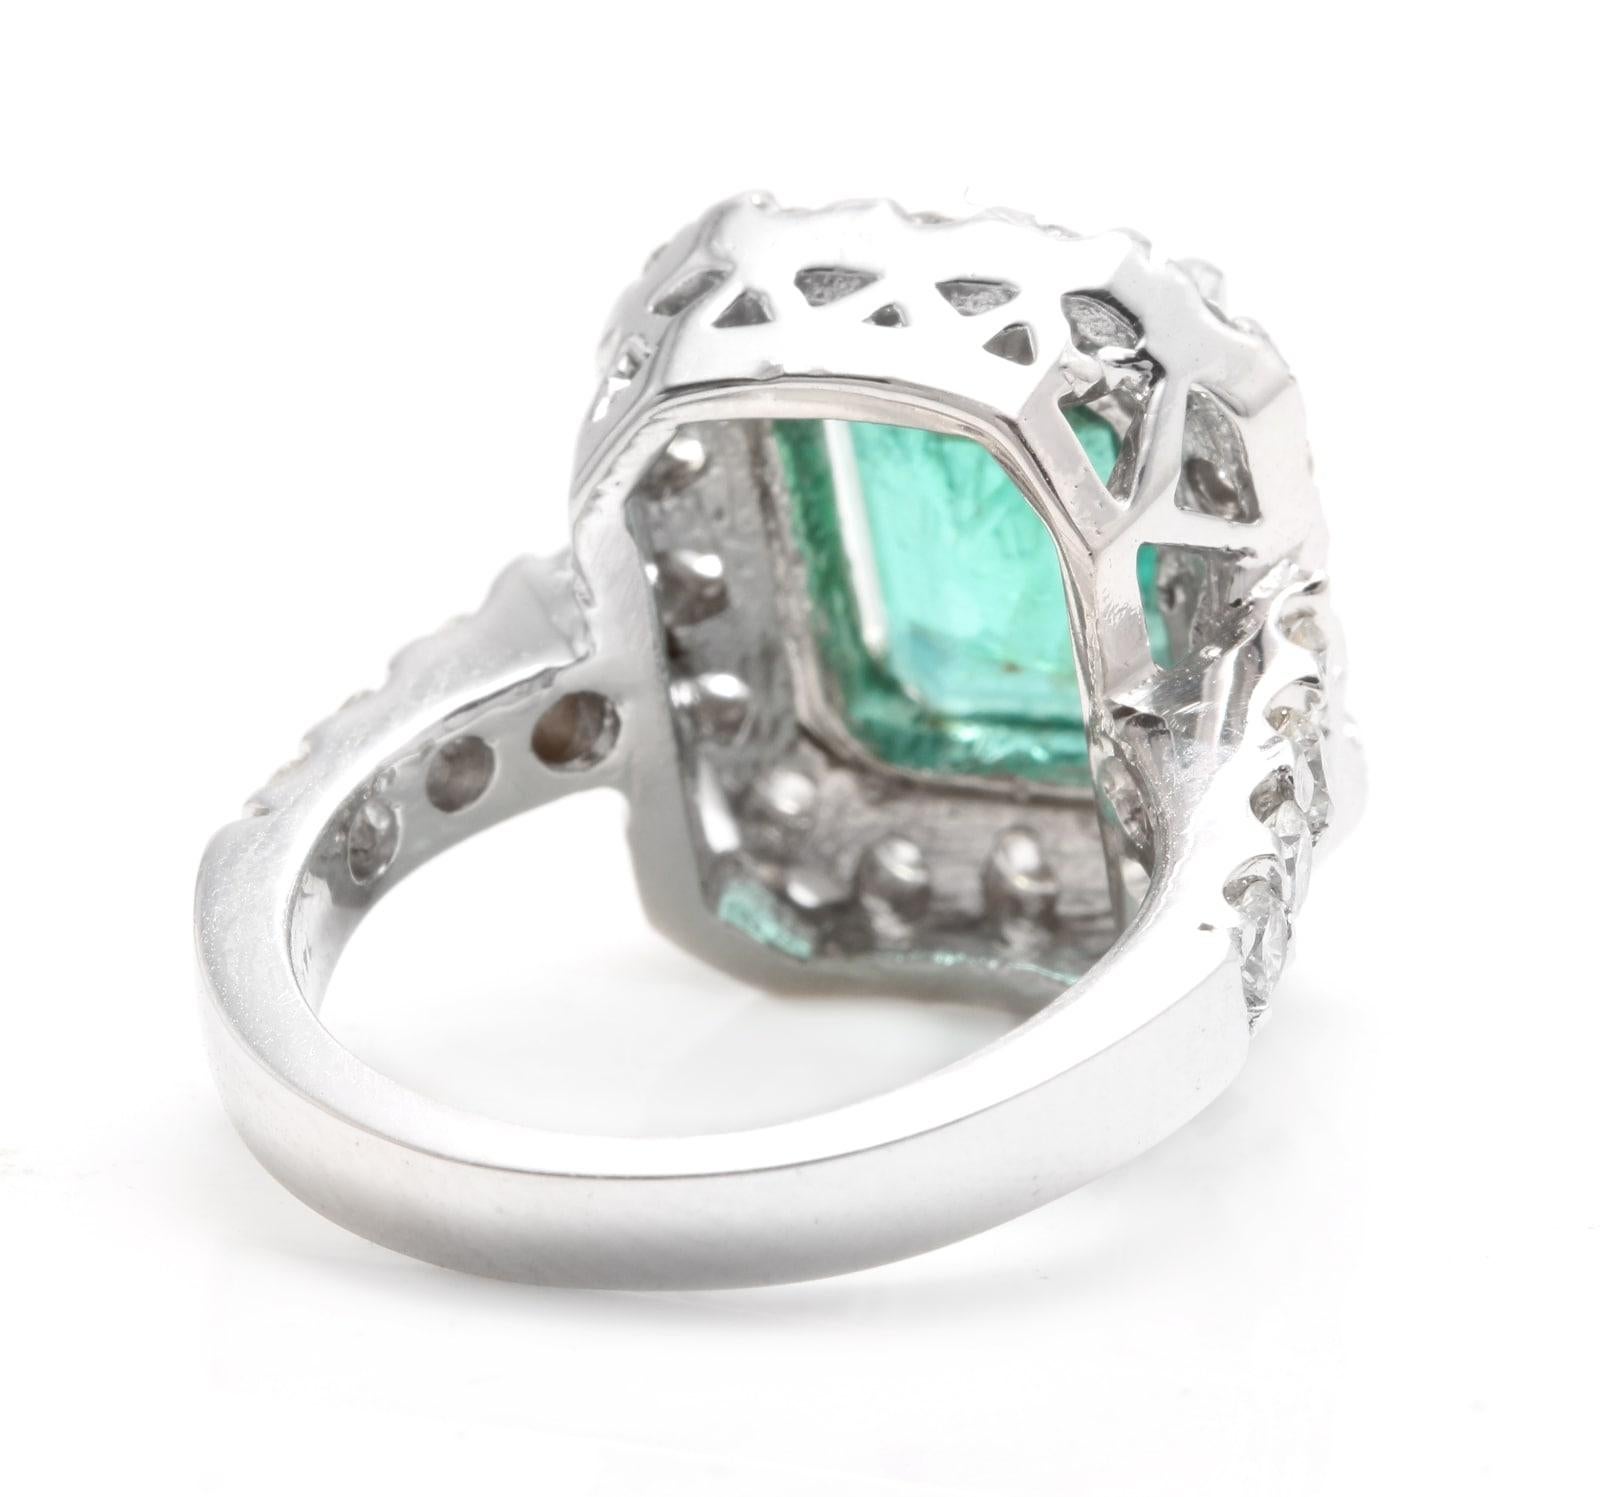 Emerald Cut 5.30 Carat Natural Emerald and Diamond 14 Karat Solid White Gold Ring For Sale